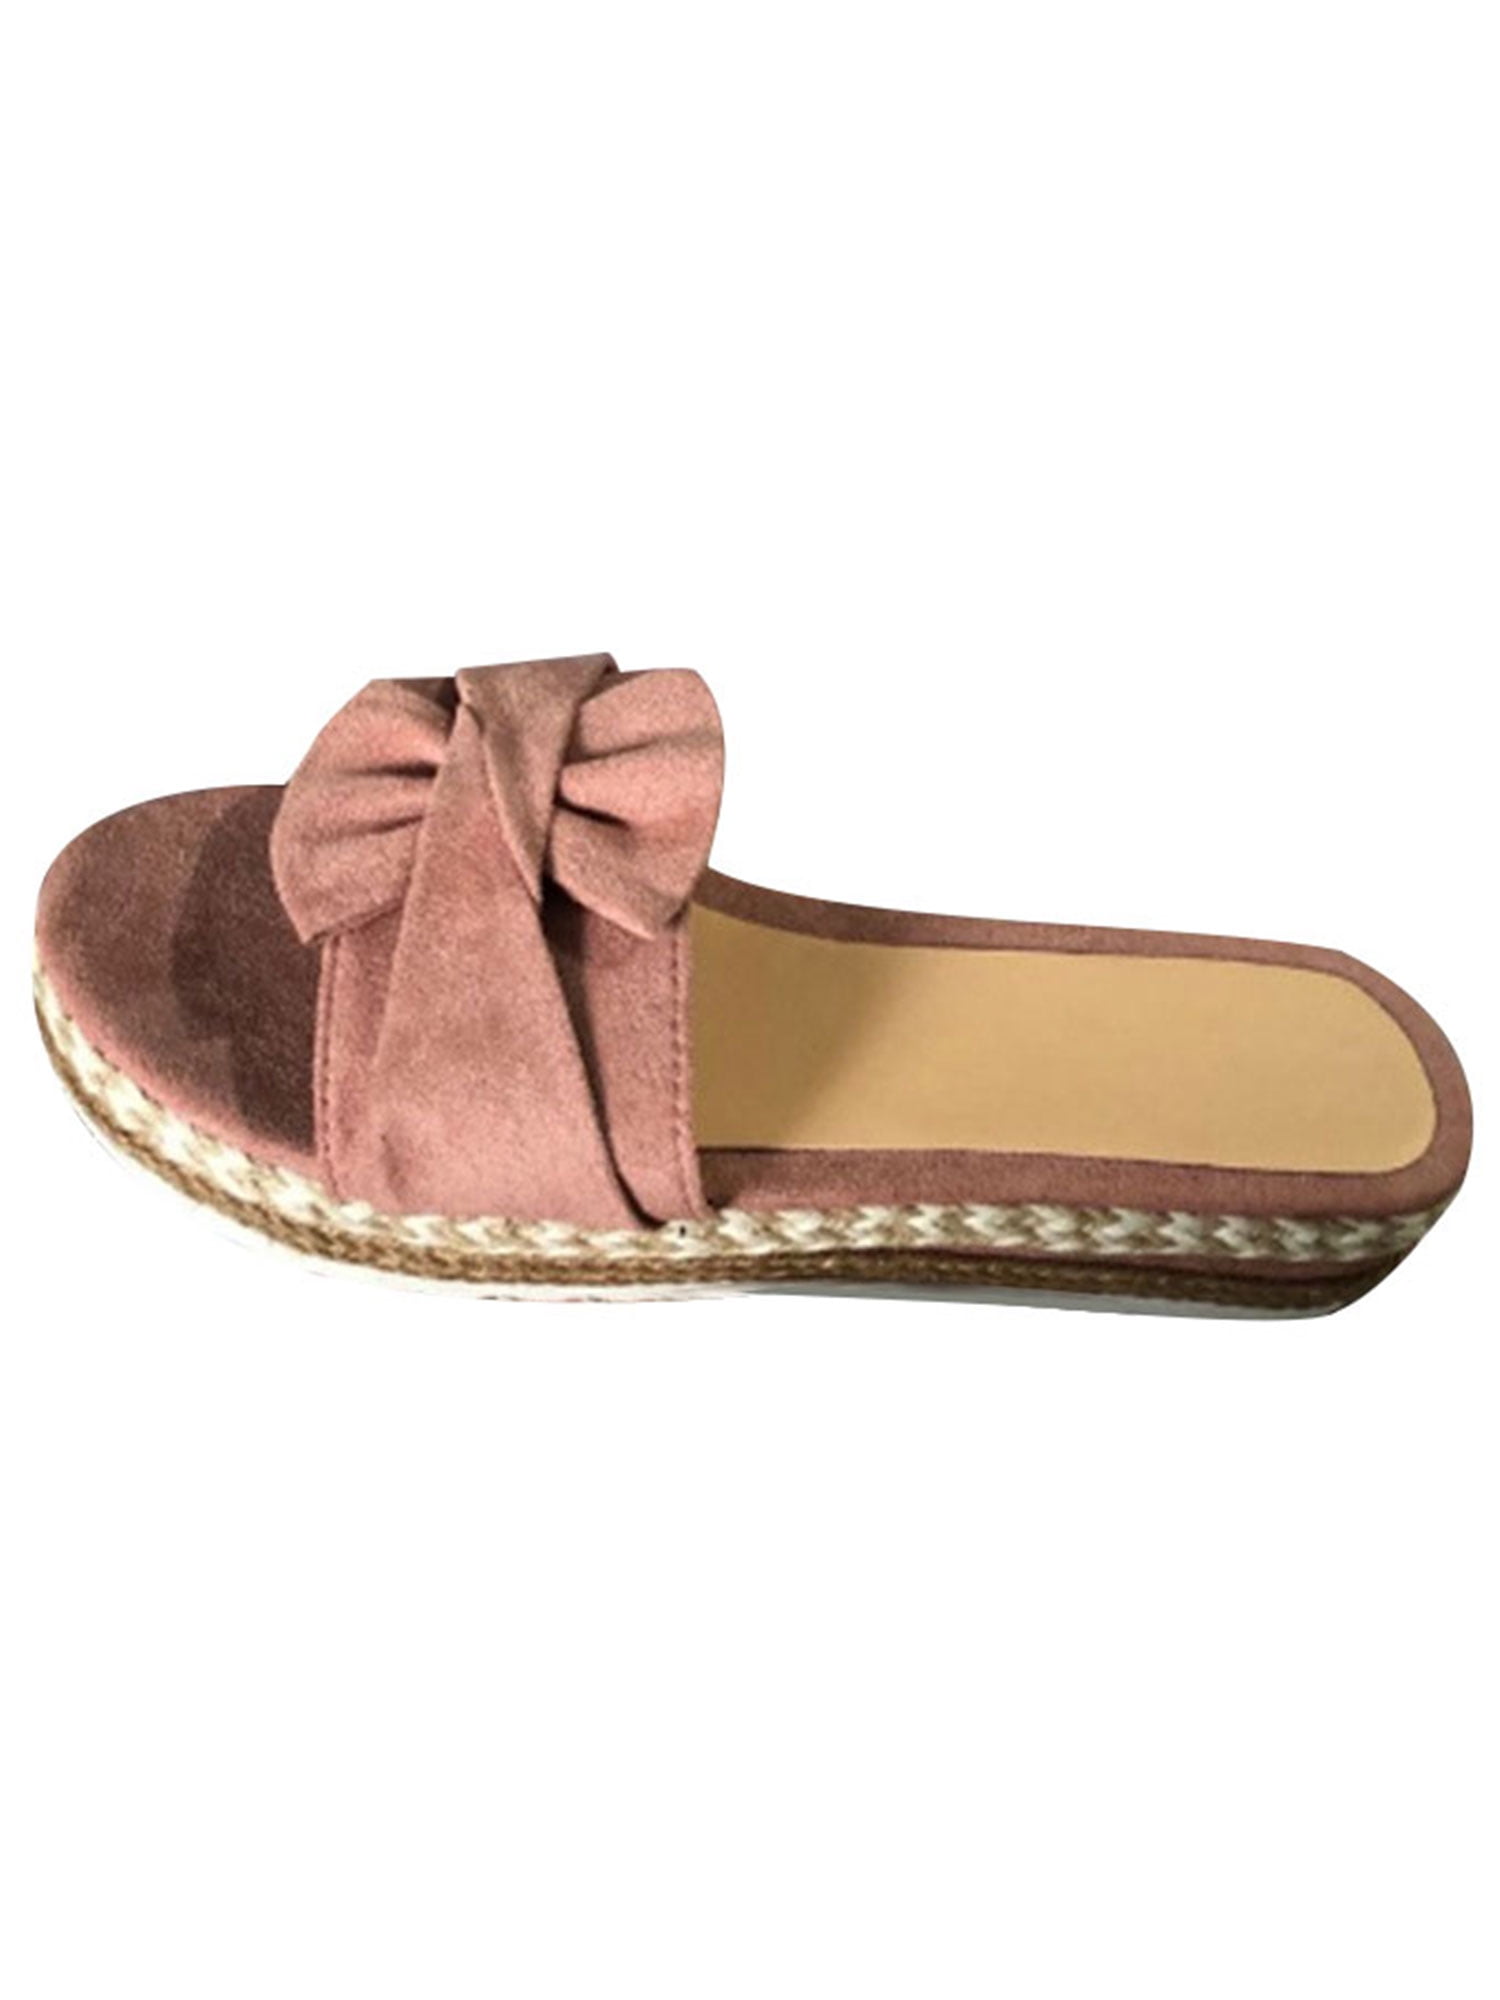 Sandals  Shoes  Slides   Slippers  Summer  Shoes Casual  Women  Indoor Bow Knot 